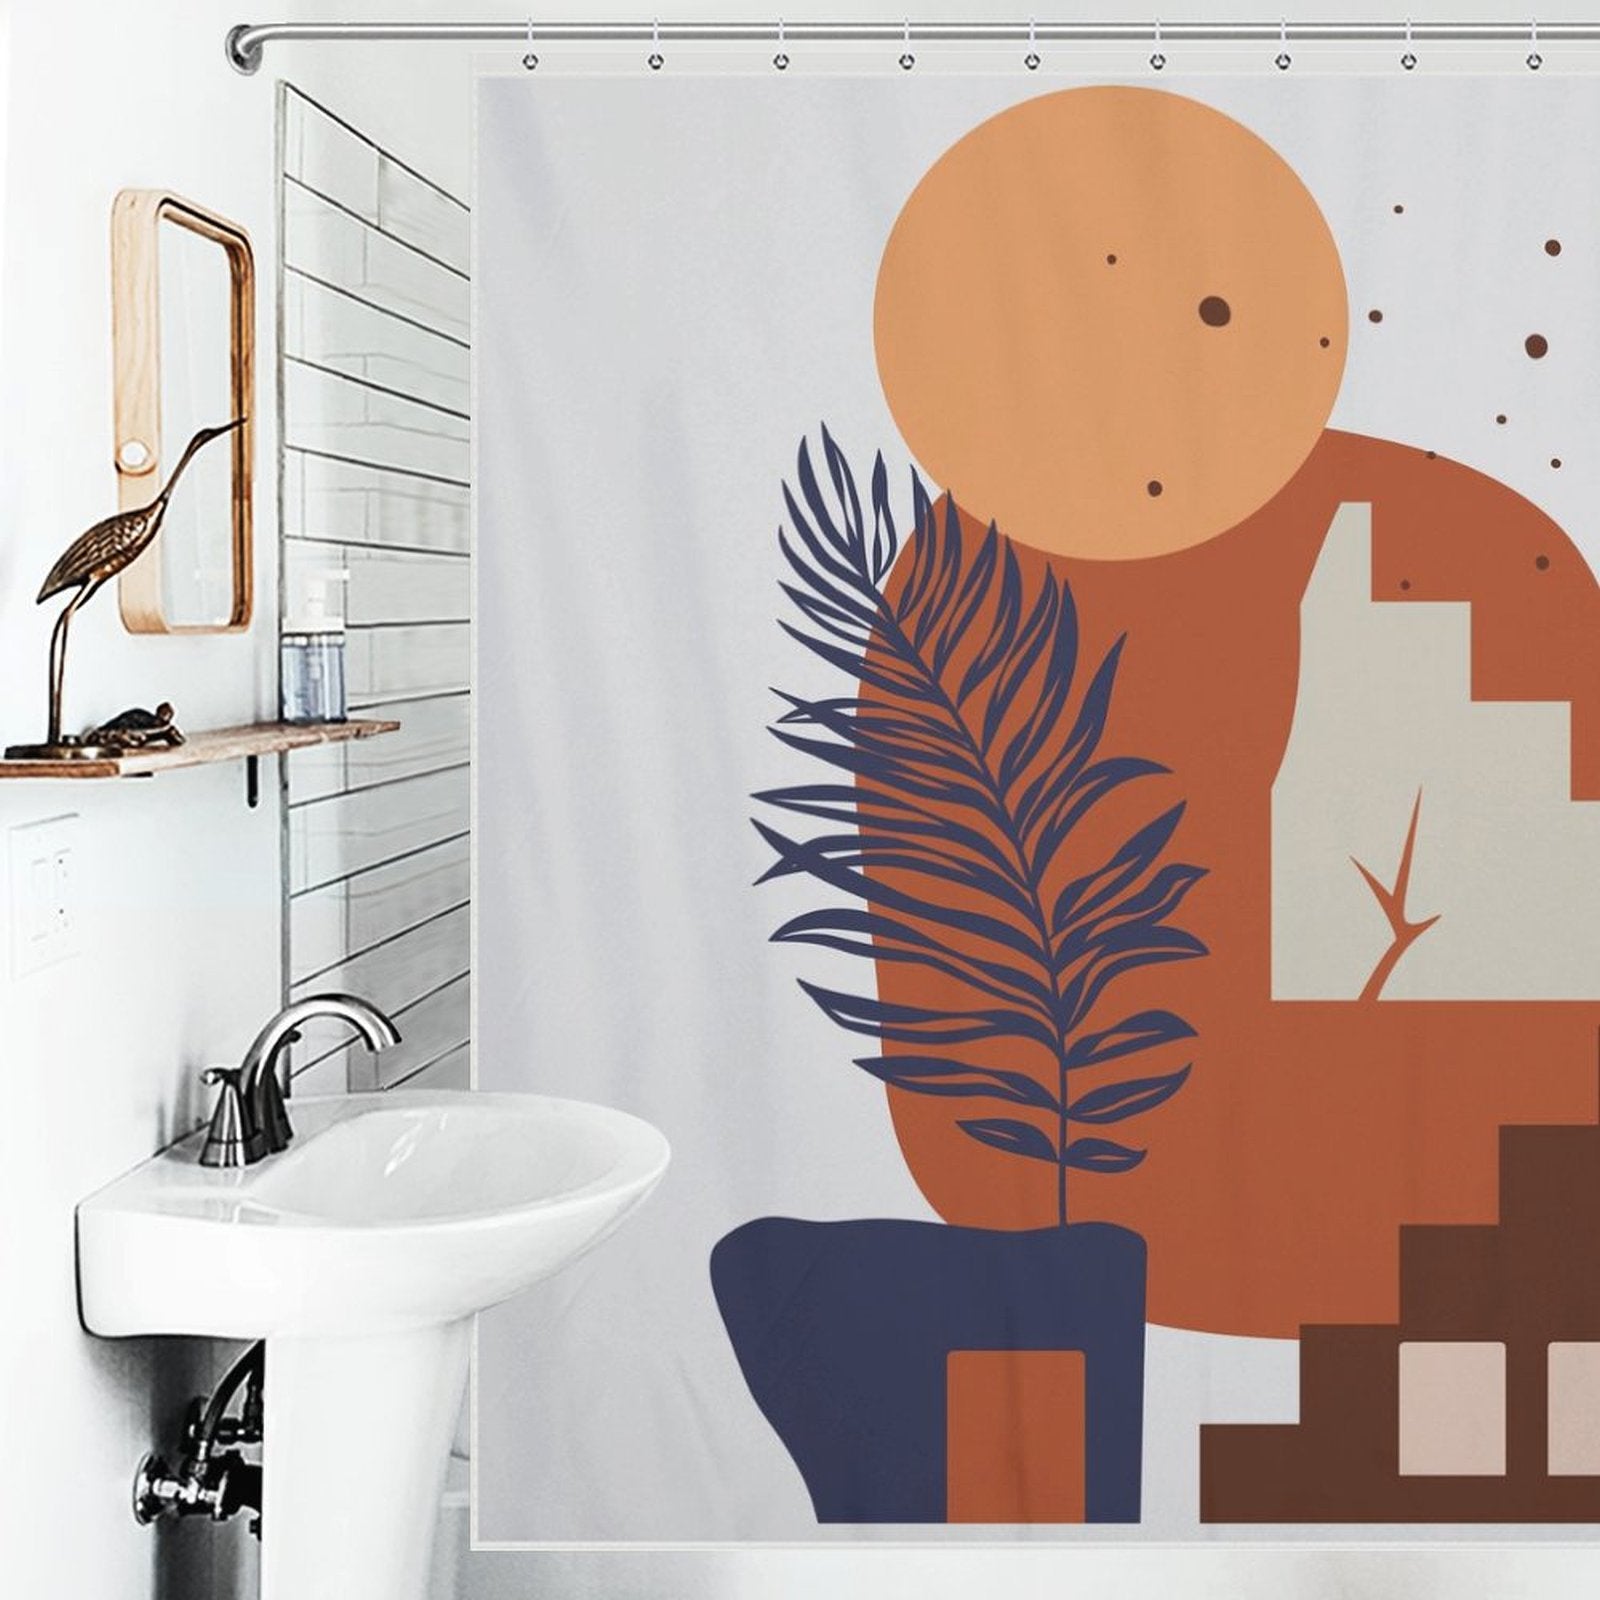 Bathroom with a minimalist design featuring a Boho Abstract Geometric Modern Art Leaves Sun Arch Minimalist Simple Mid Century Shower Curtain-Cottoncat by Cotton Cat. A white sink and mirror are visible in the foreground.